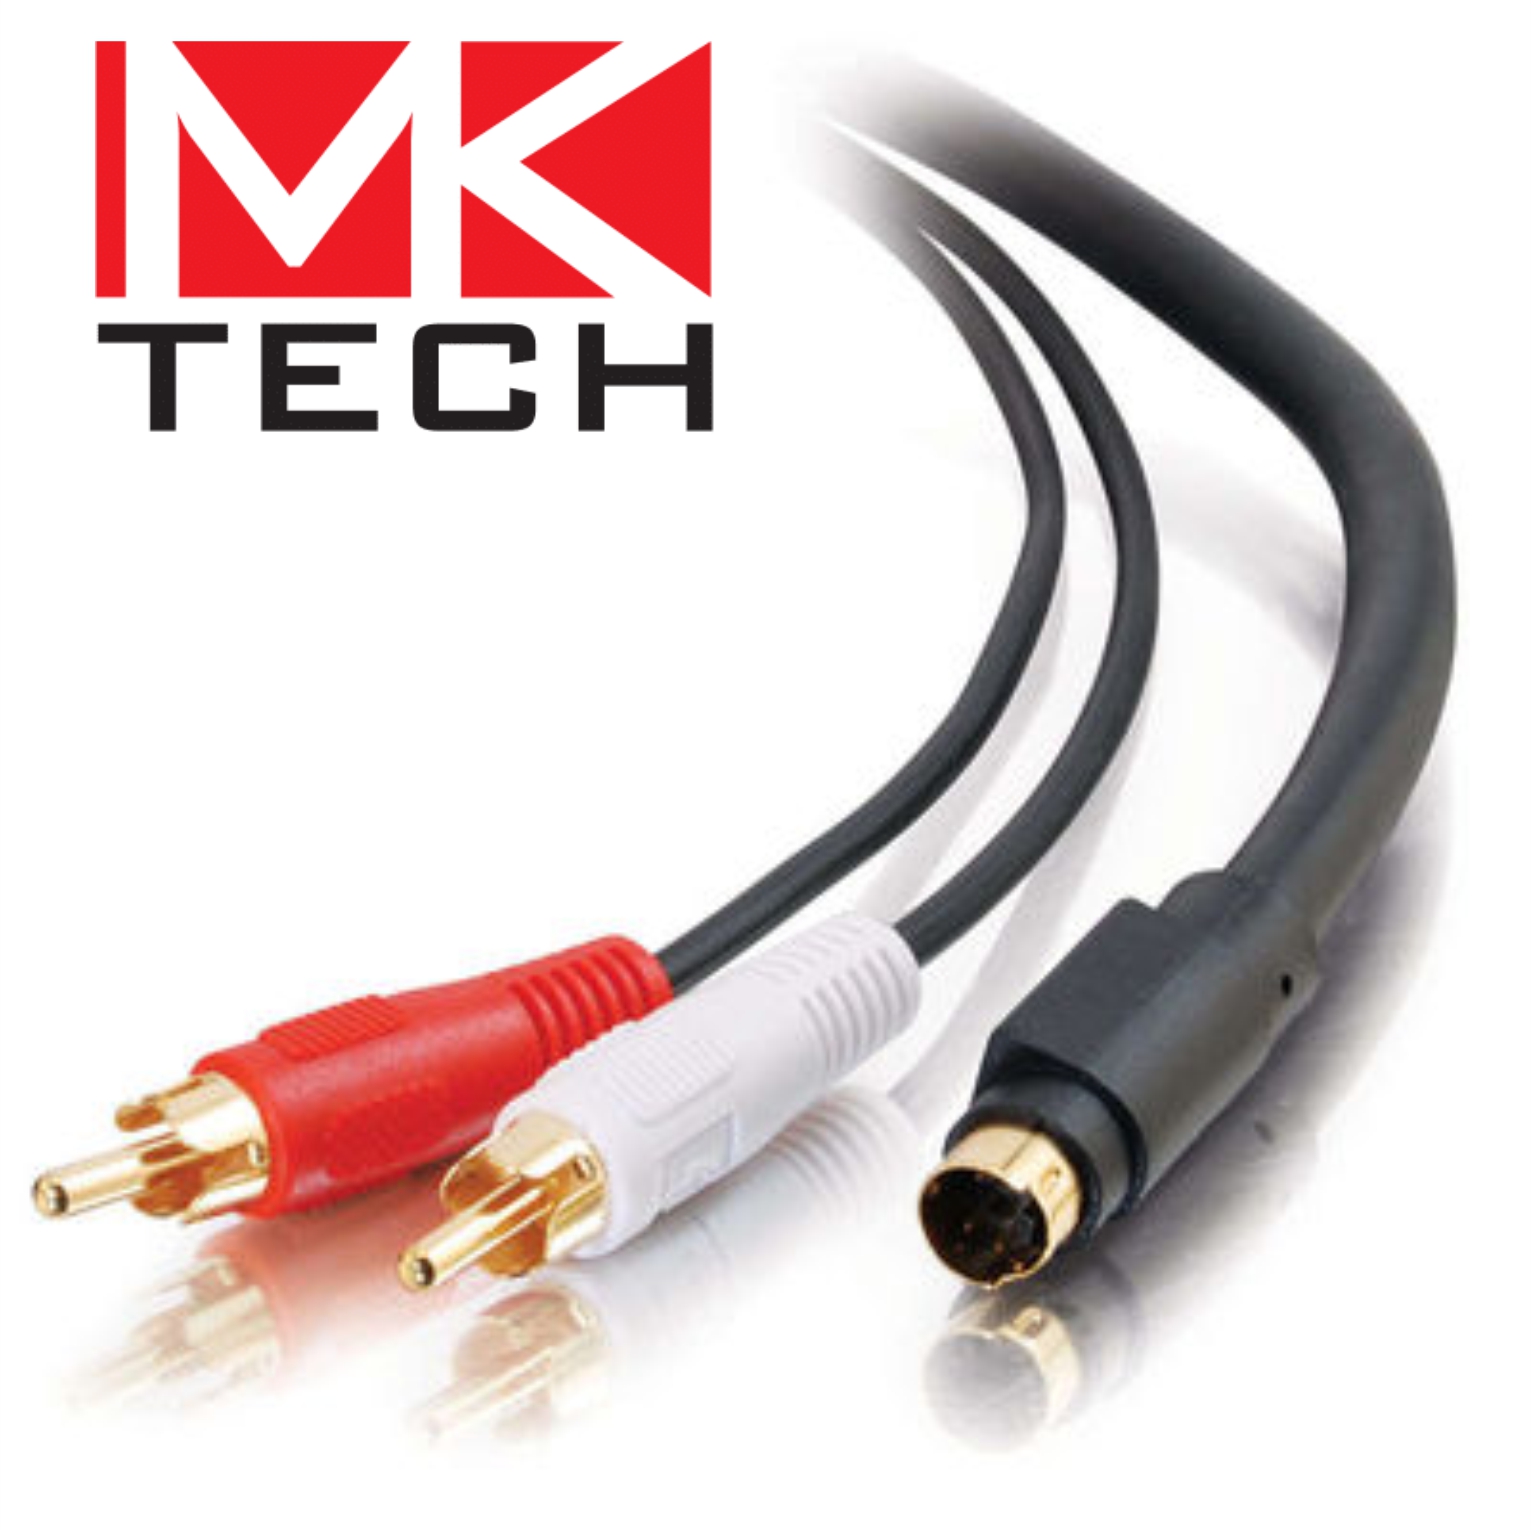 S-Video-M to Dual RCA-M Кабел (Y). 3m MKTECH